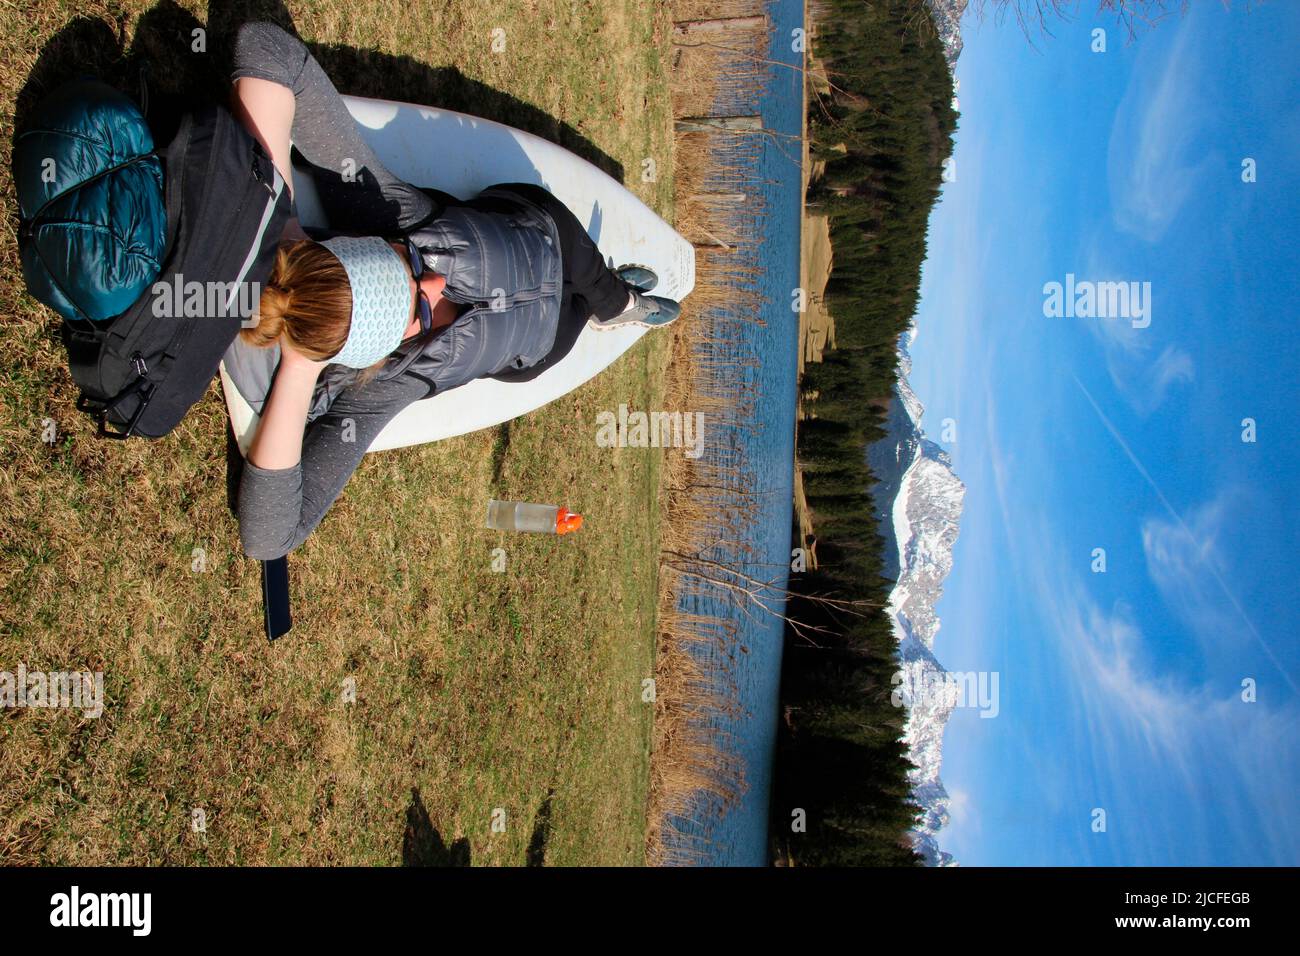 Woman resting on a stand up paddle board, Geroldsee, Germany, Bavaria, Upper Bavaria, Isar Valley, Karwendel Mountains, Stock Photo